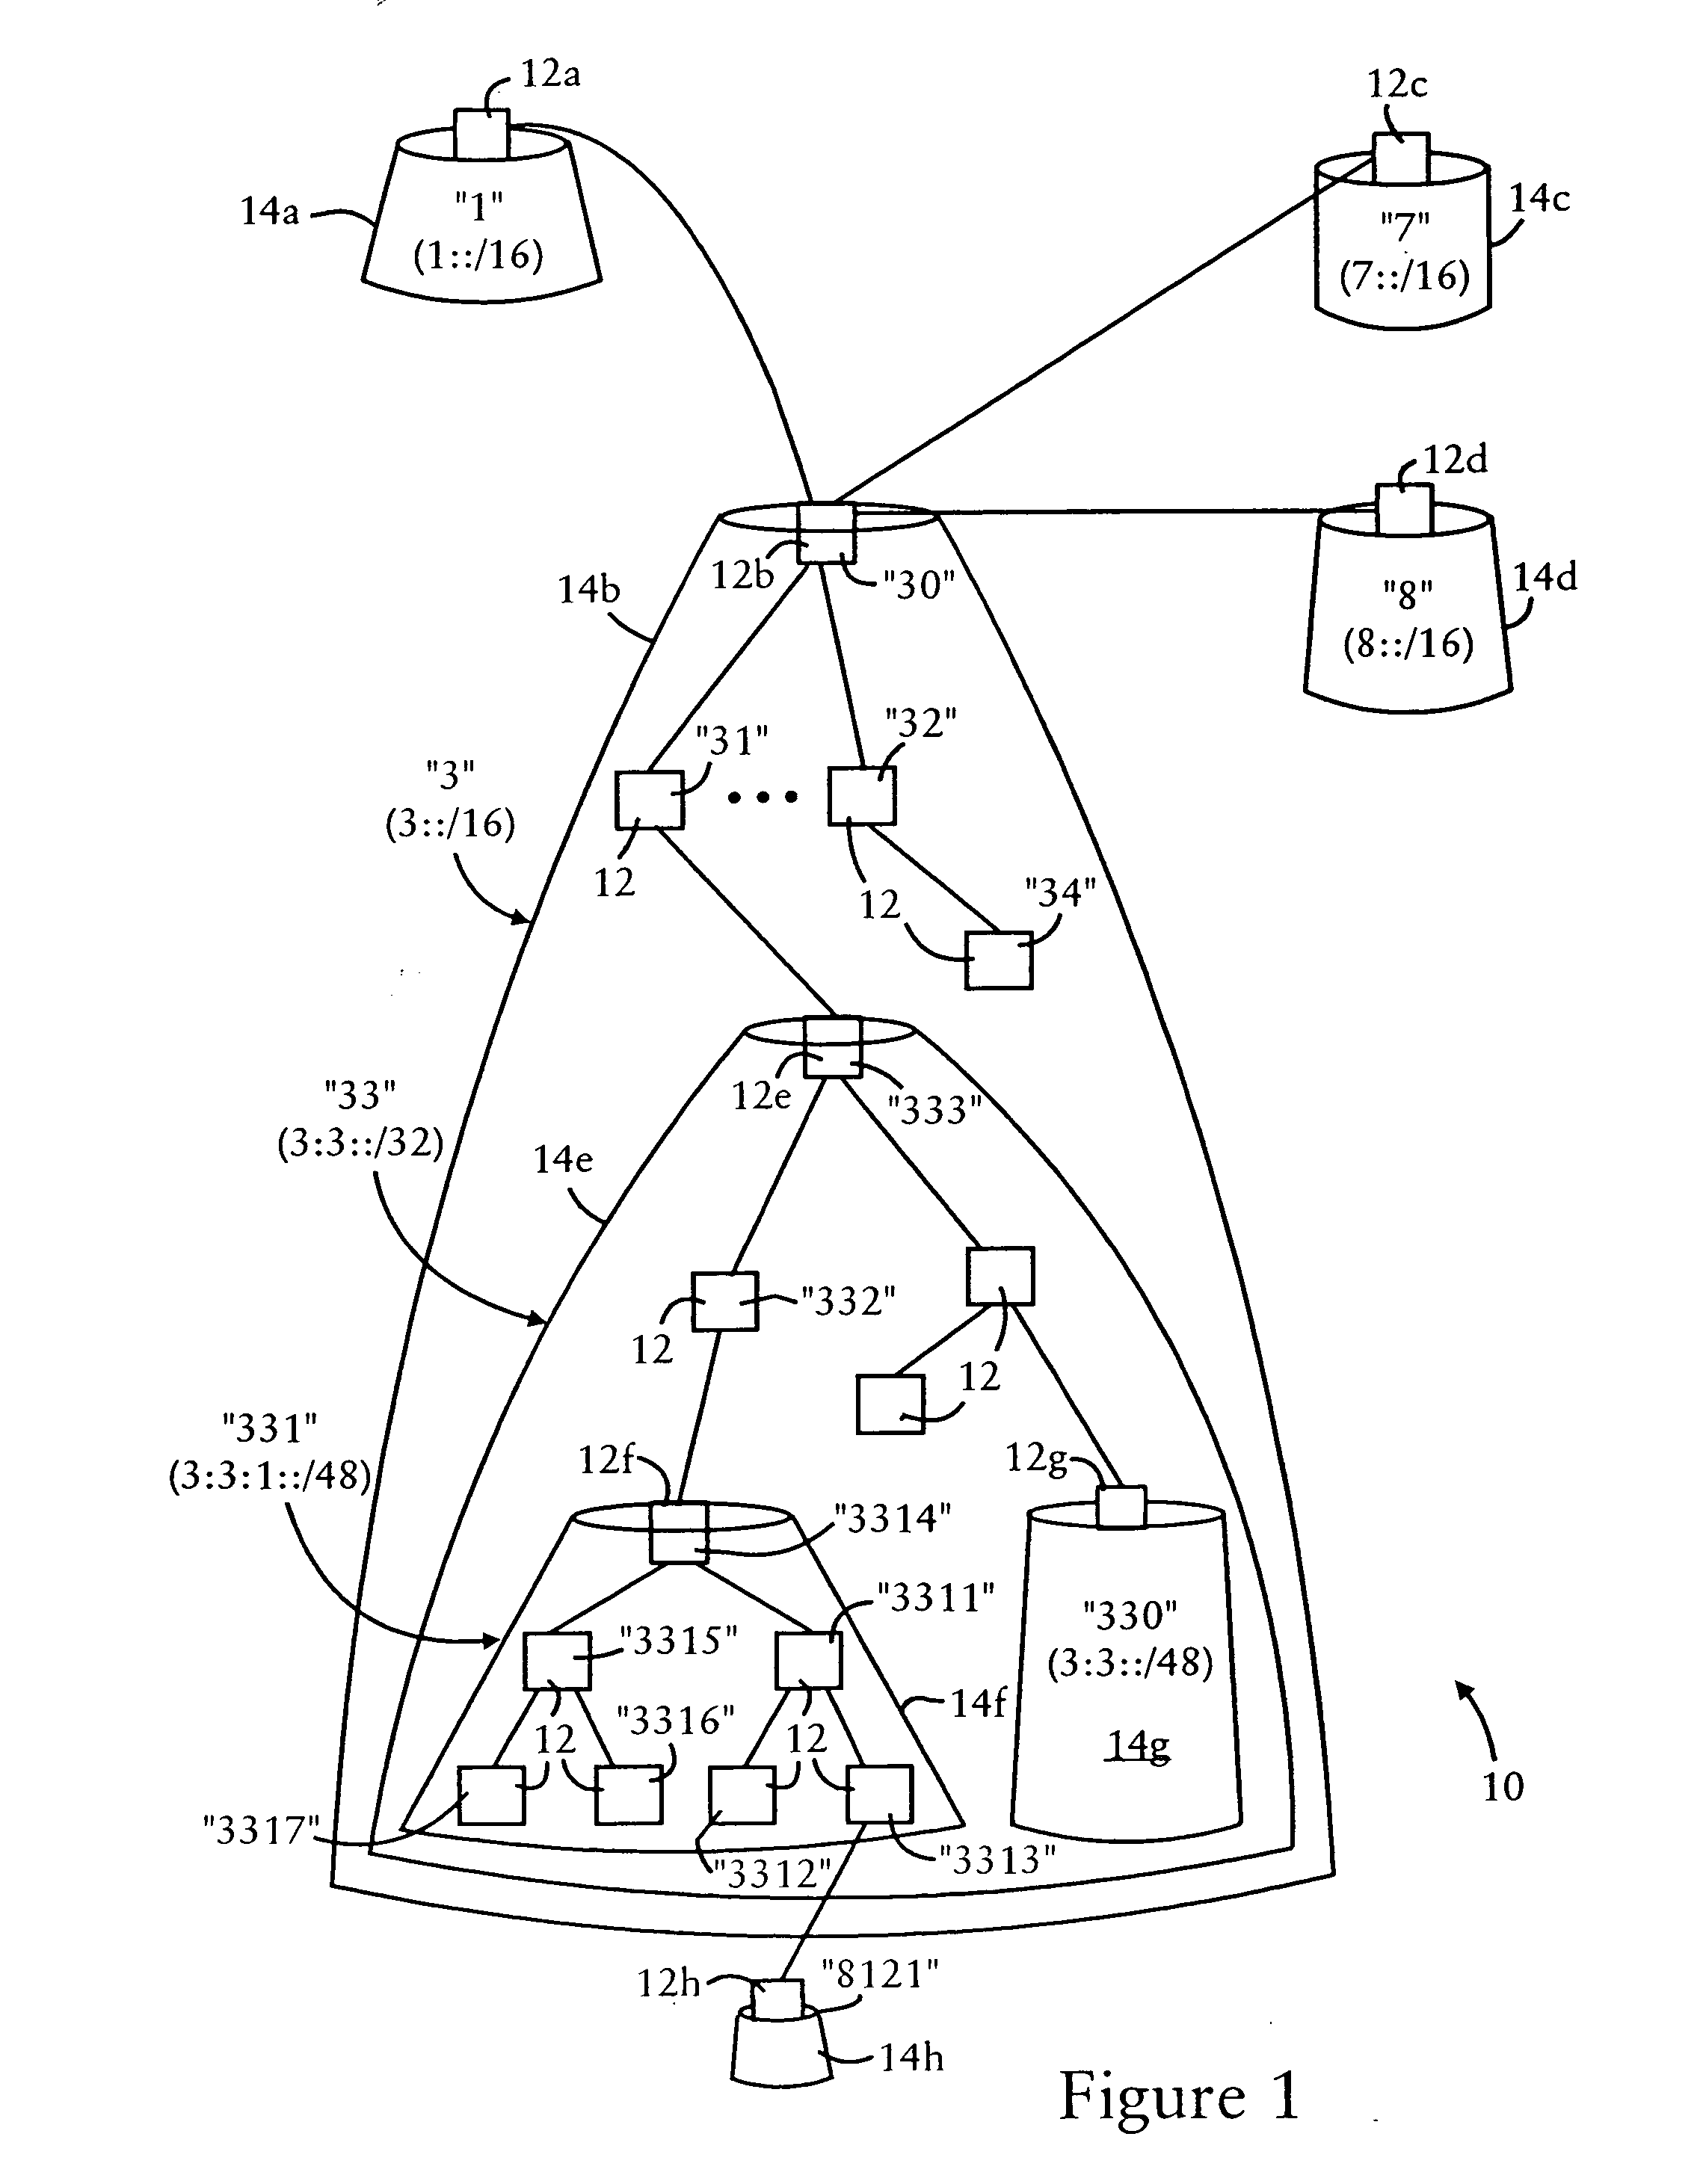 Ad hoc network formation and management based on aggregation of ad hoc nodes according to an aggregation hierarchy